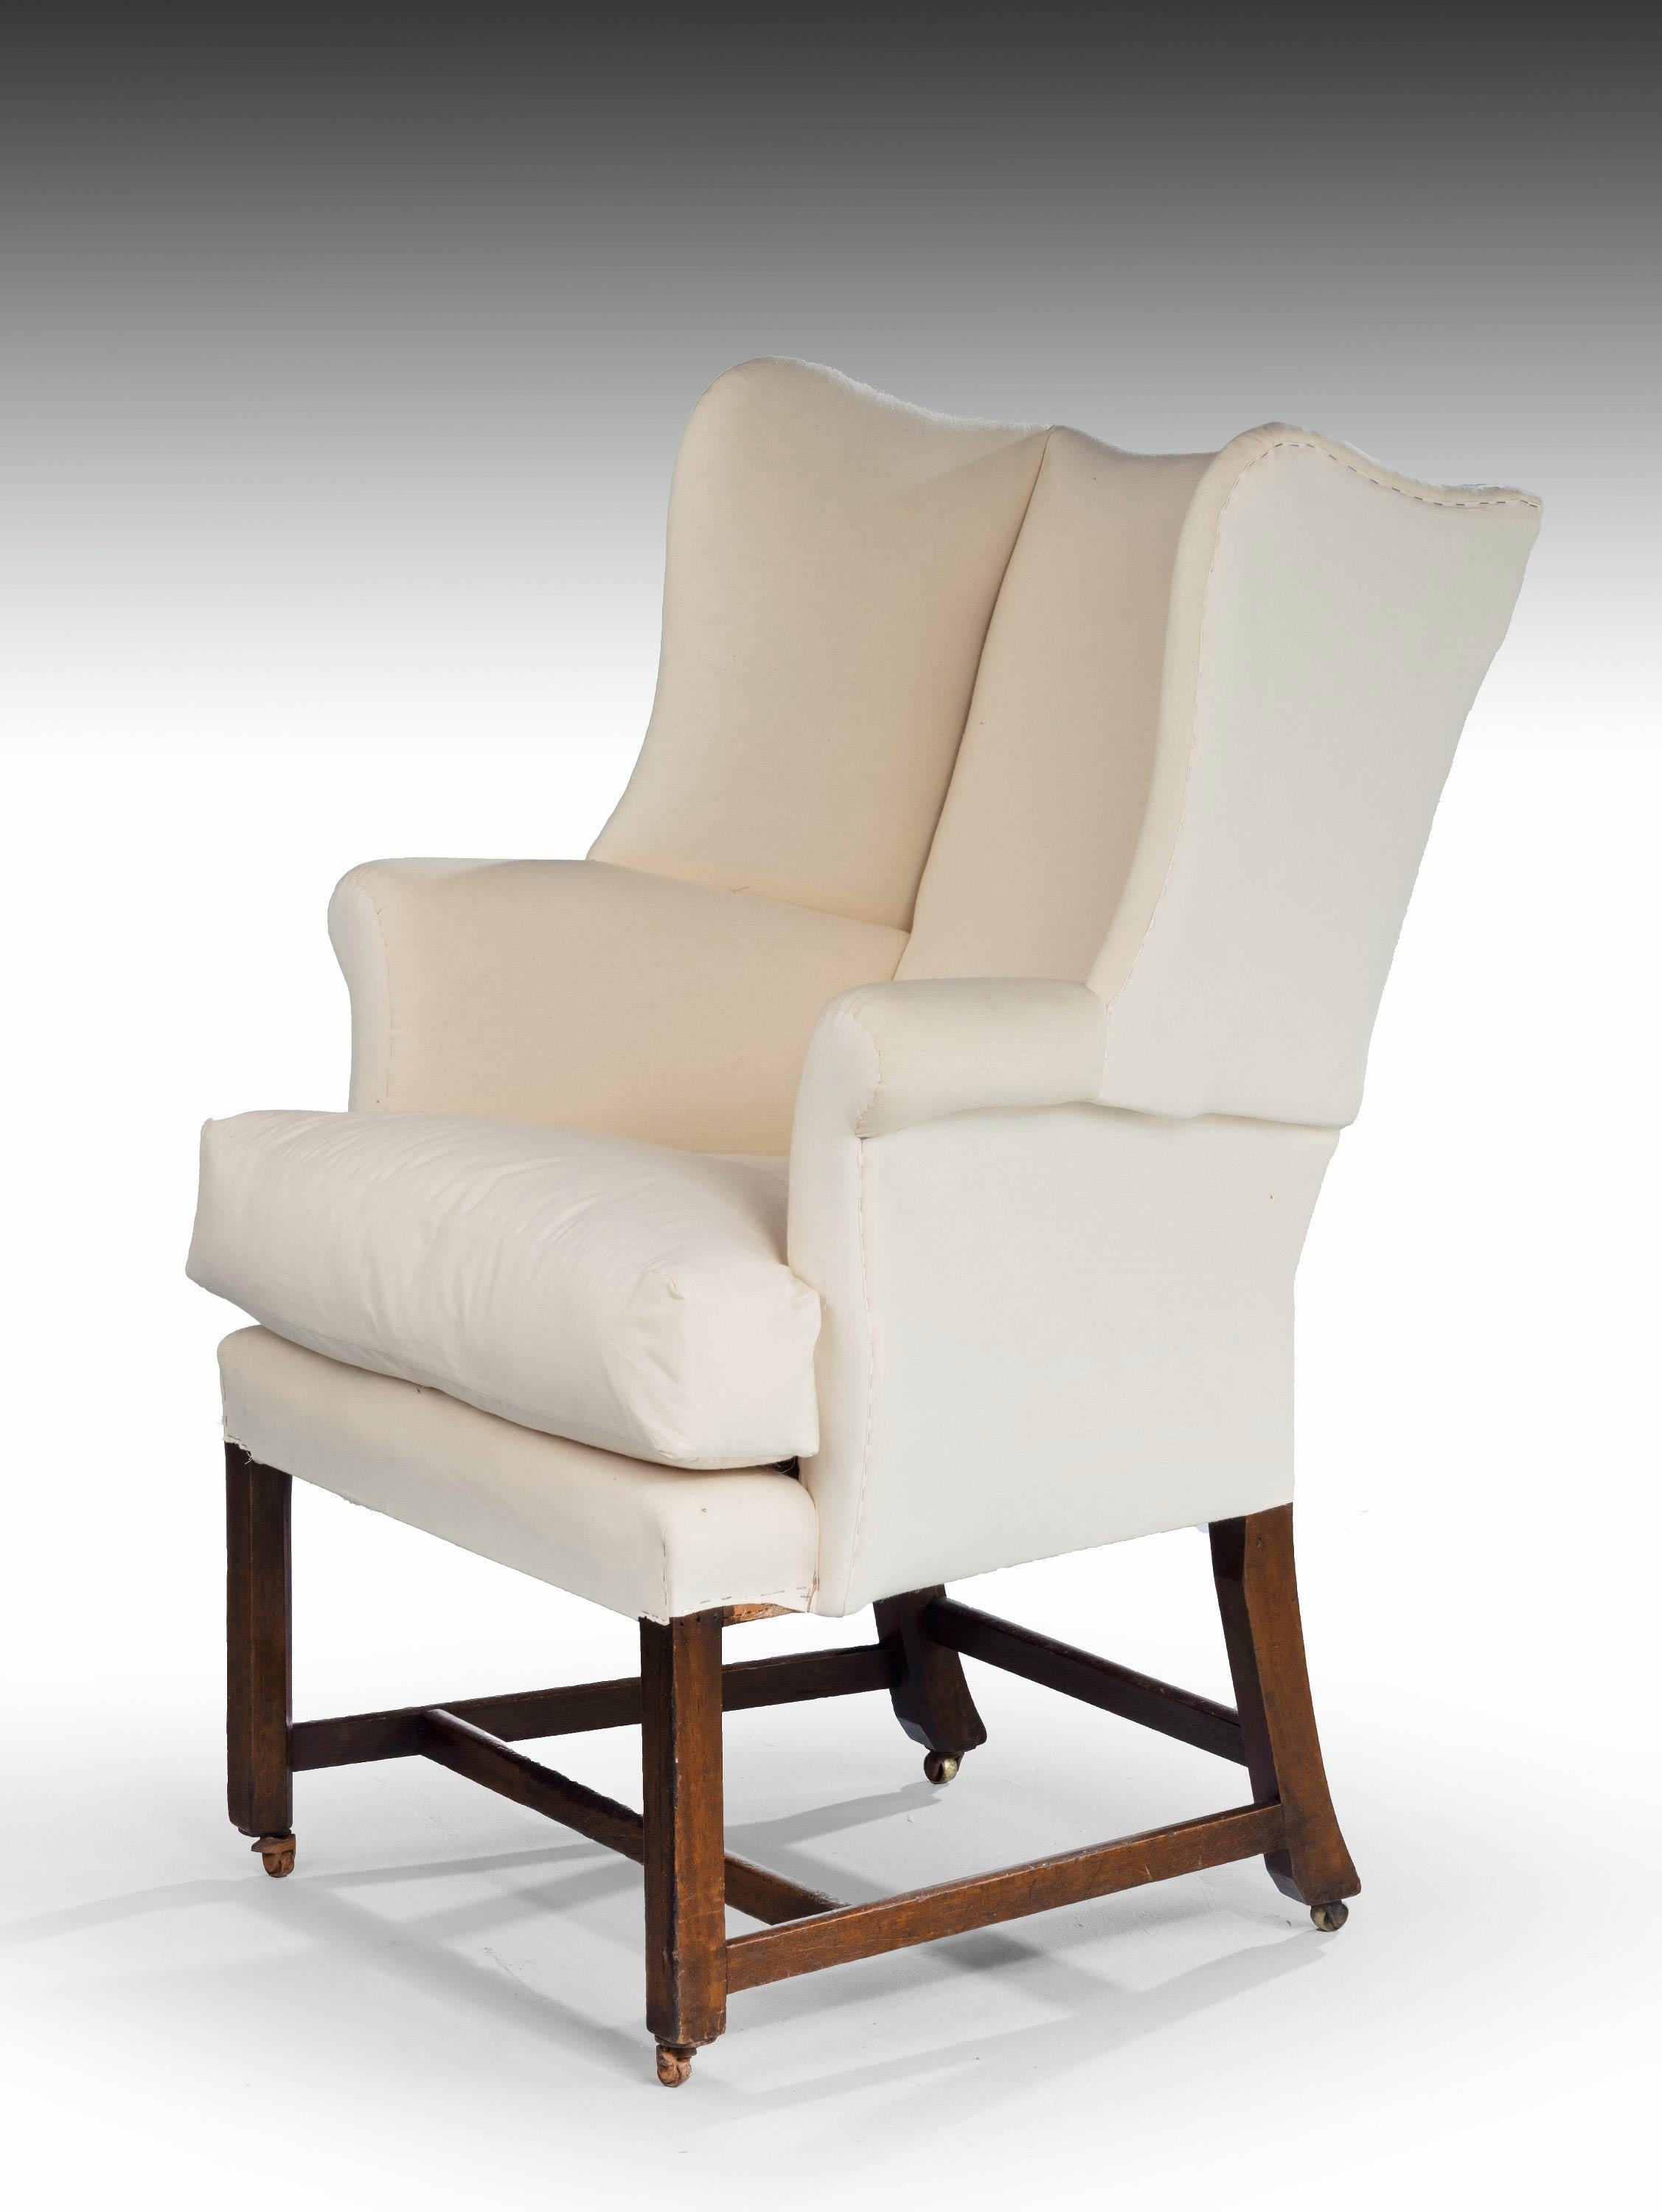 Chippendale Design Wing Chair of Small Proportions im Zustand „Gut“ in Peterborough, Northamptonshire